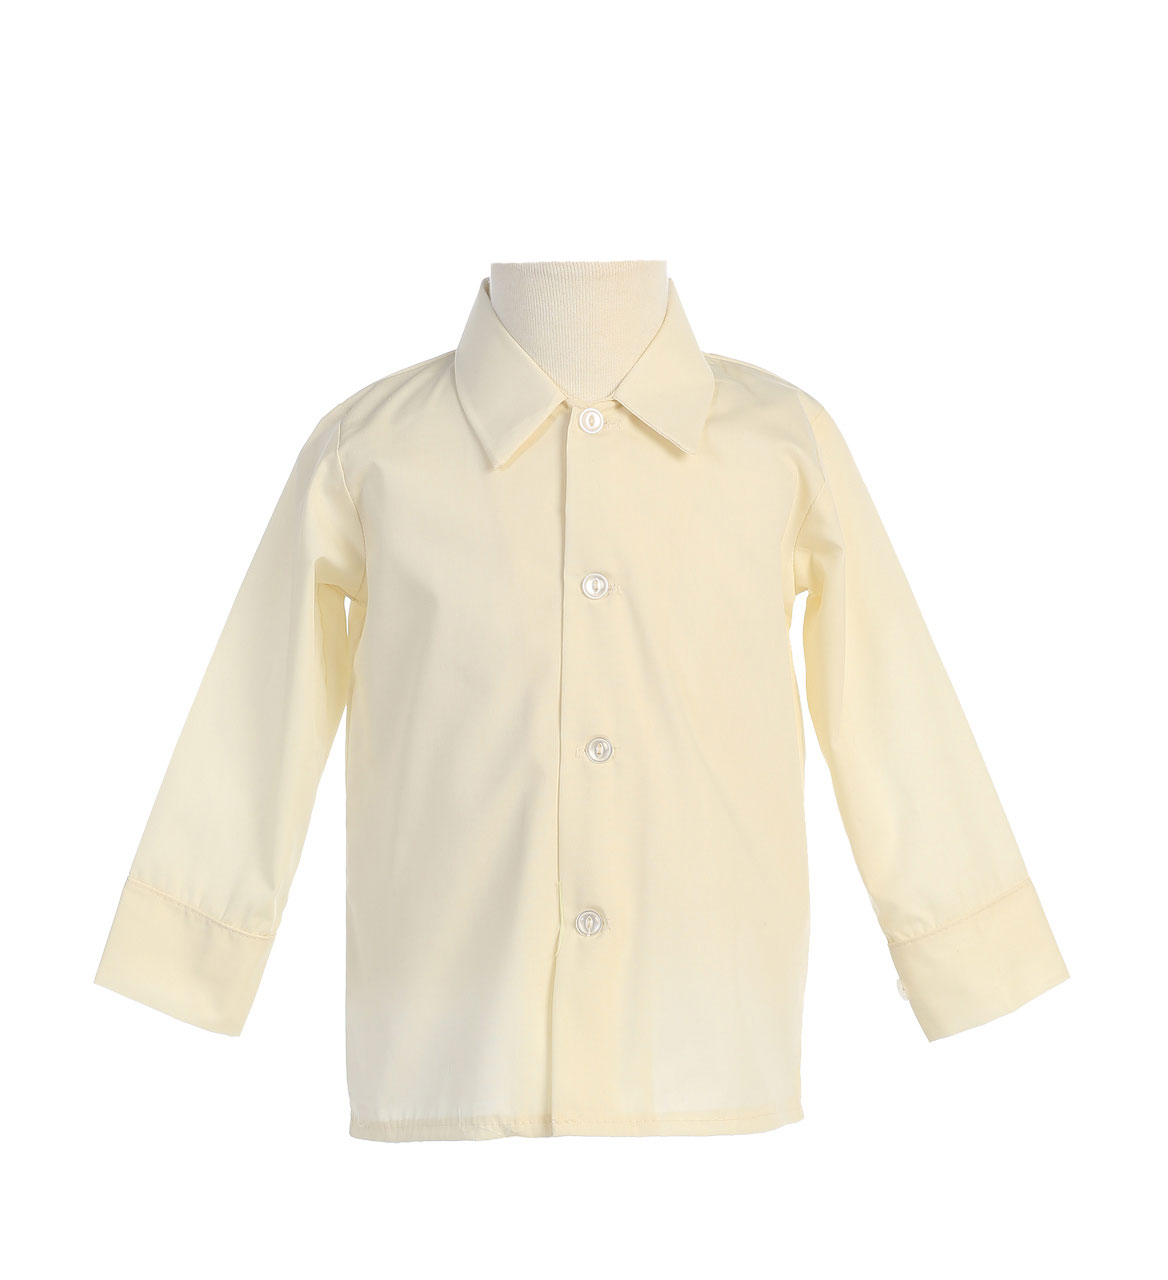 Boys Long Sleeved Simple Dress Shirt - Available in Ivory L